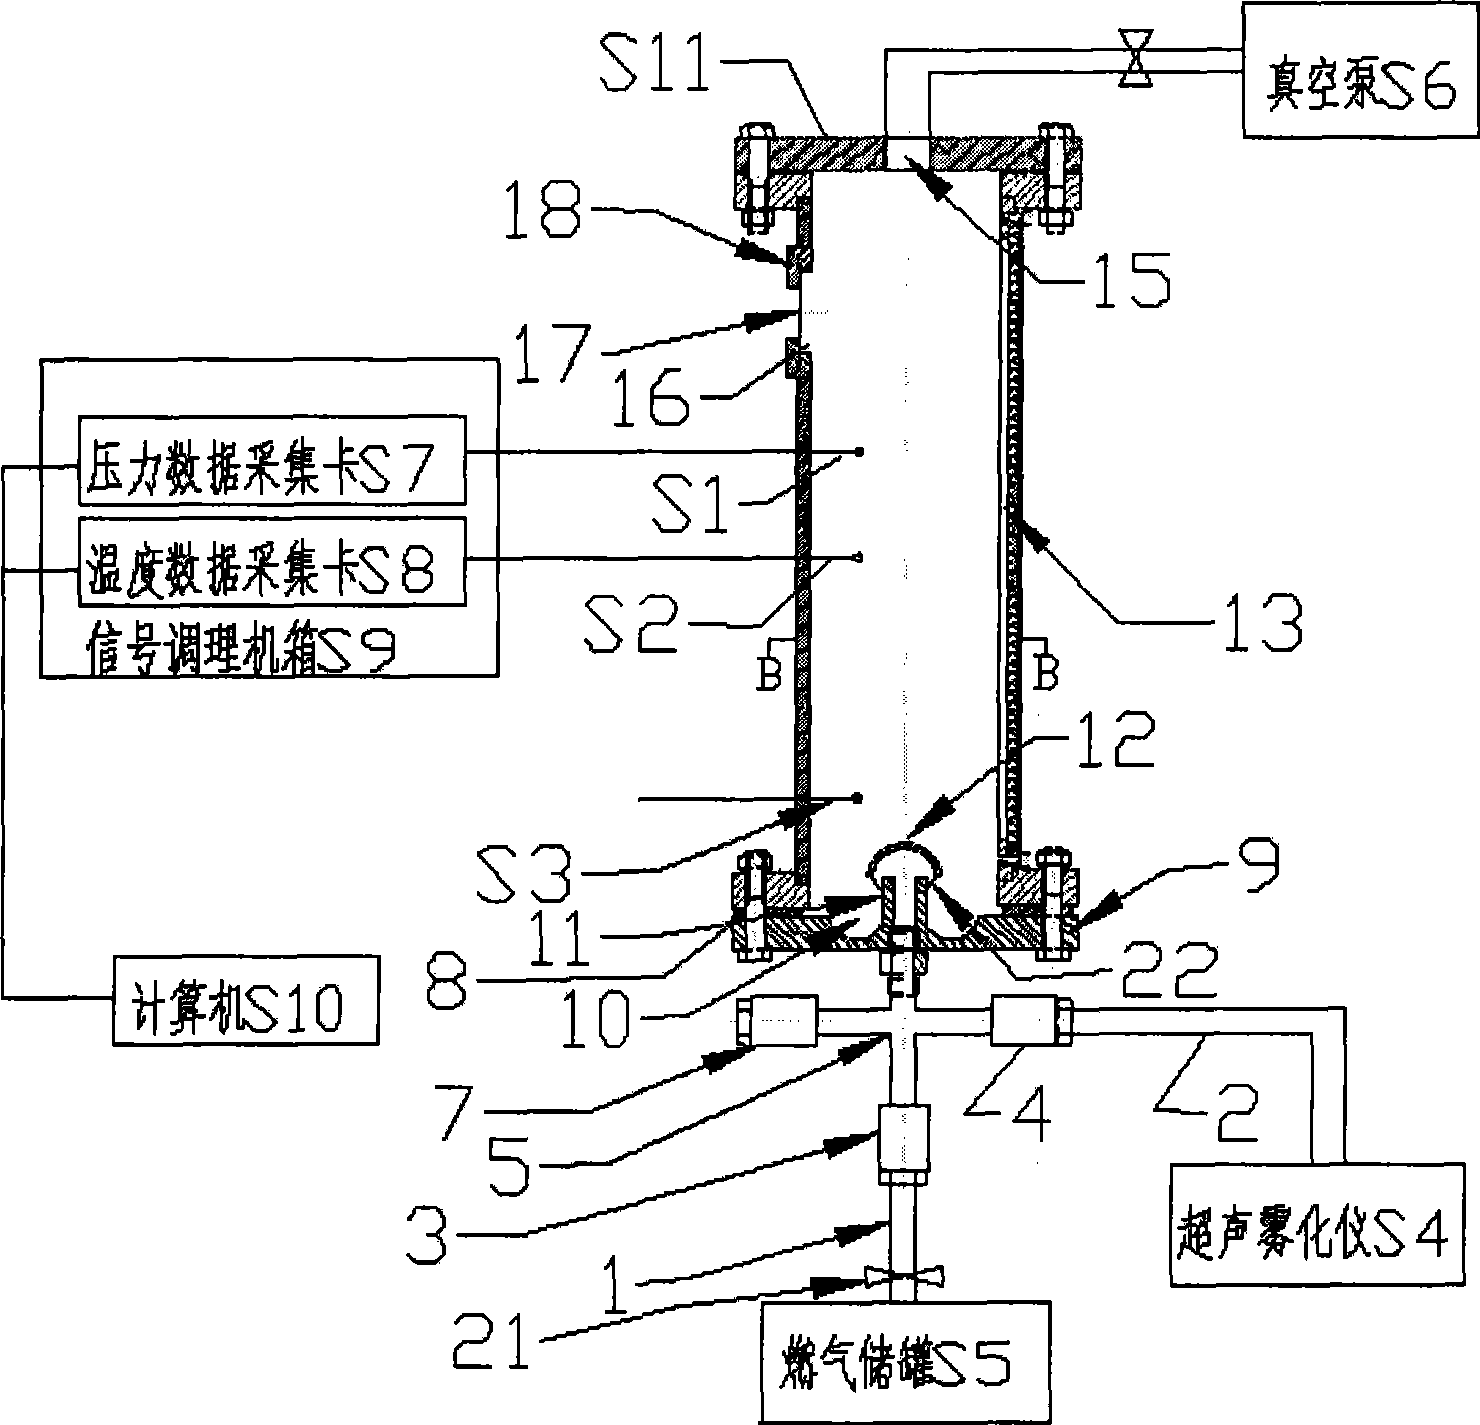 Experimental device for restraining gas and dust explosion by water mist